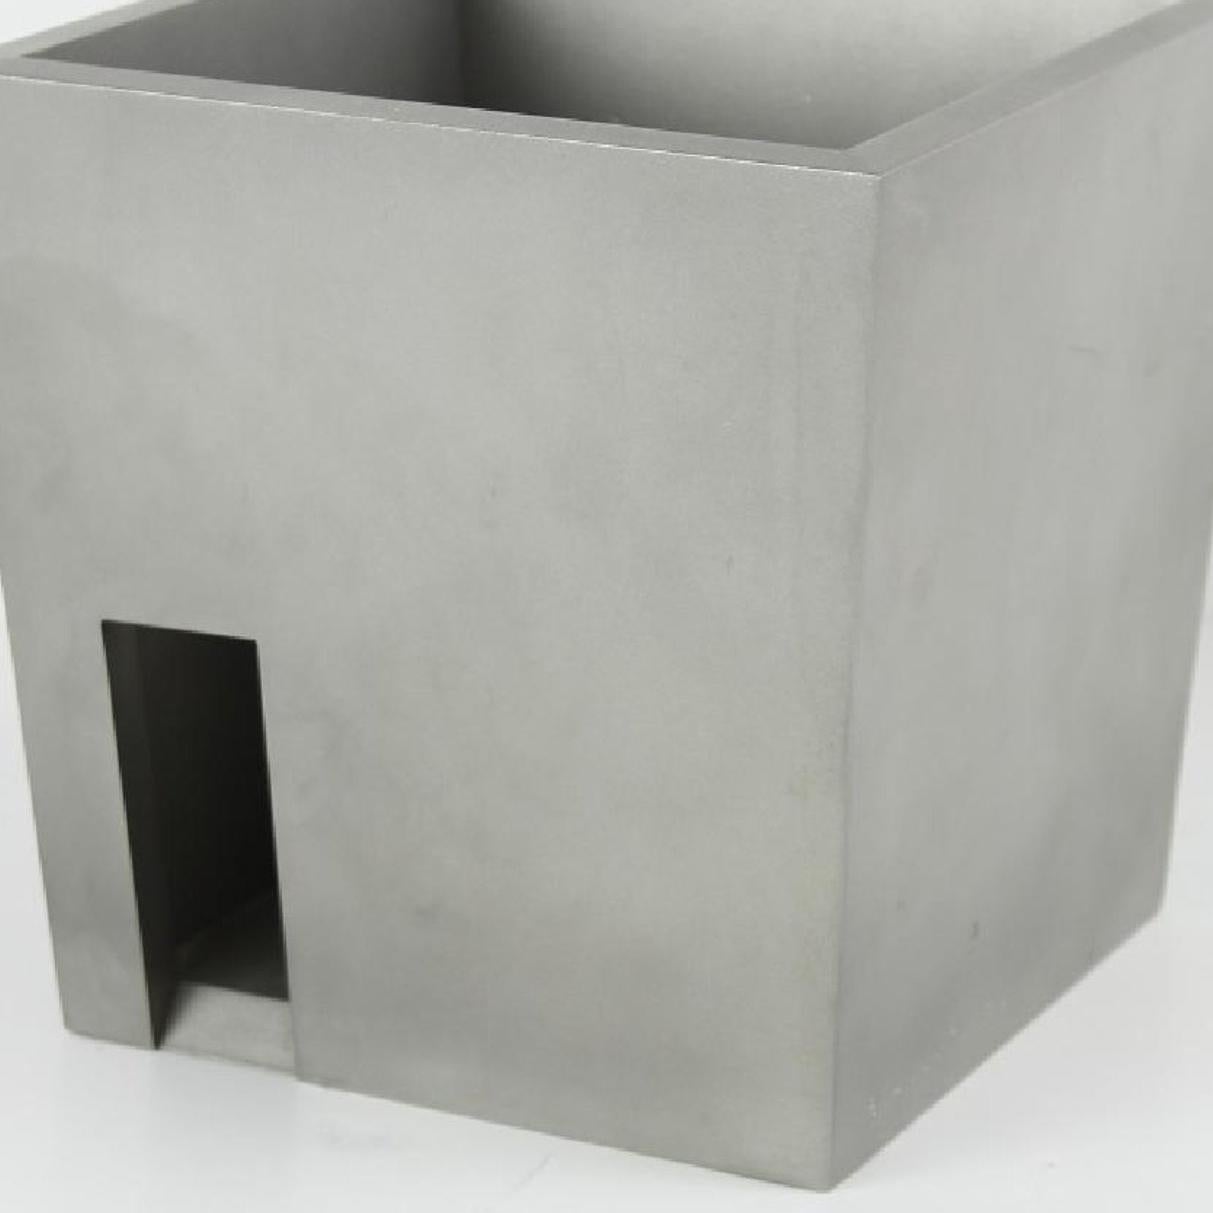 STEEL ROOM, 1989, steel sculpture, 8 x 8 x 8”, signed and dated. 

Peter Lodato was born in 1946 in Los Angeles, California, has exhibited extensively and received significant acclaim throughout his art career.  During the 1960’s and 1970’s, his art